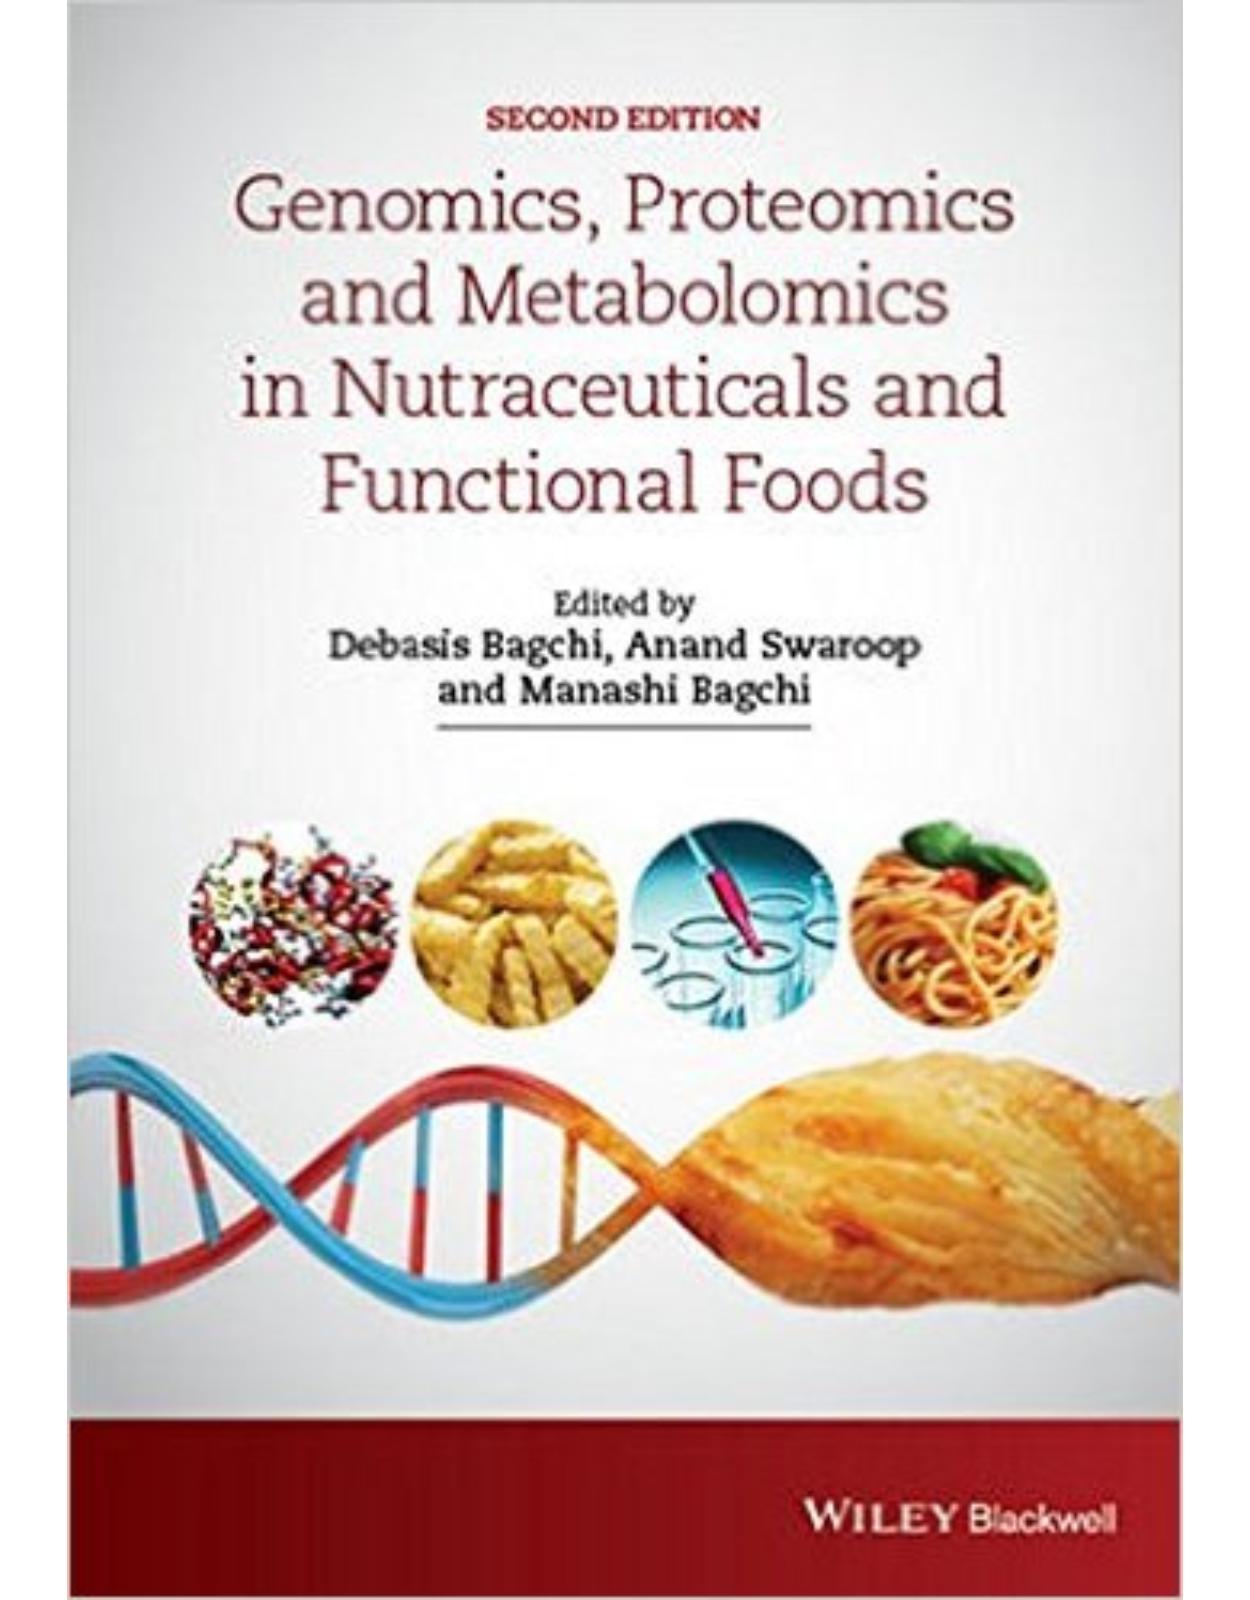 Genomics, Proteomics and Metabolomics in Nutraceuticals and Functional Foods, 2nd Edition